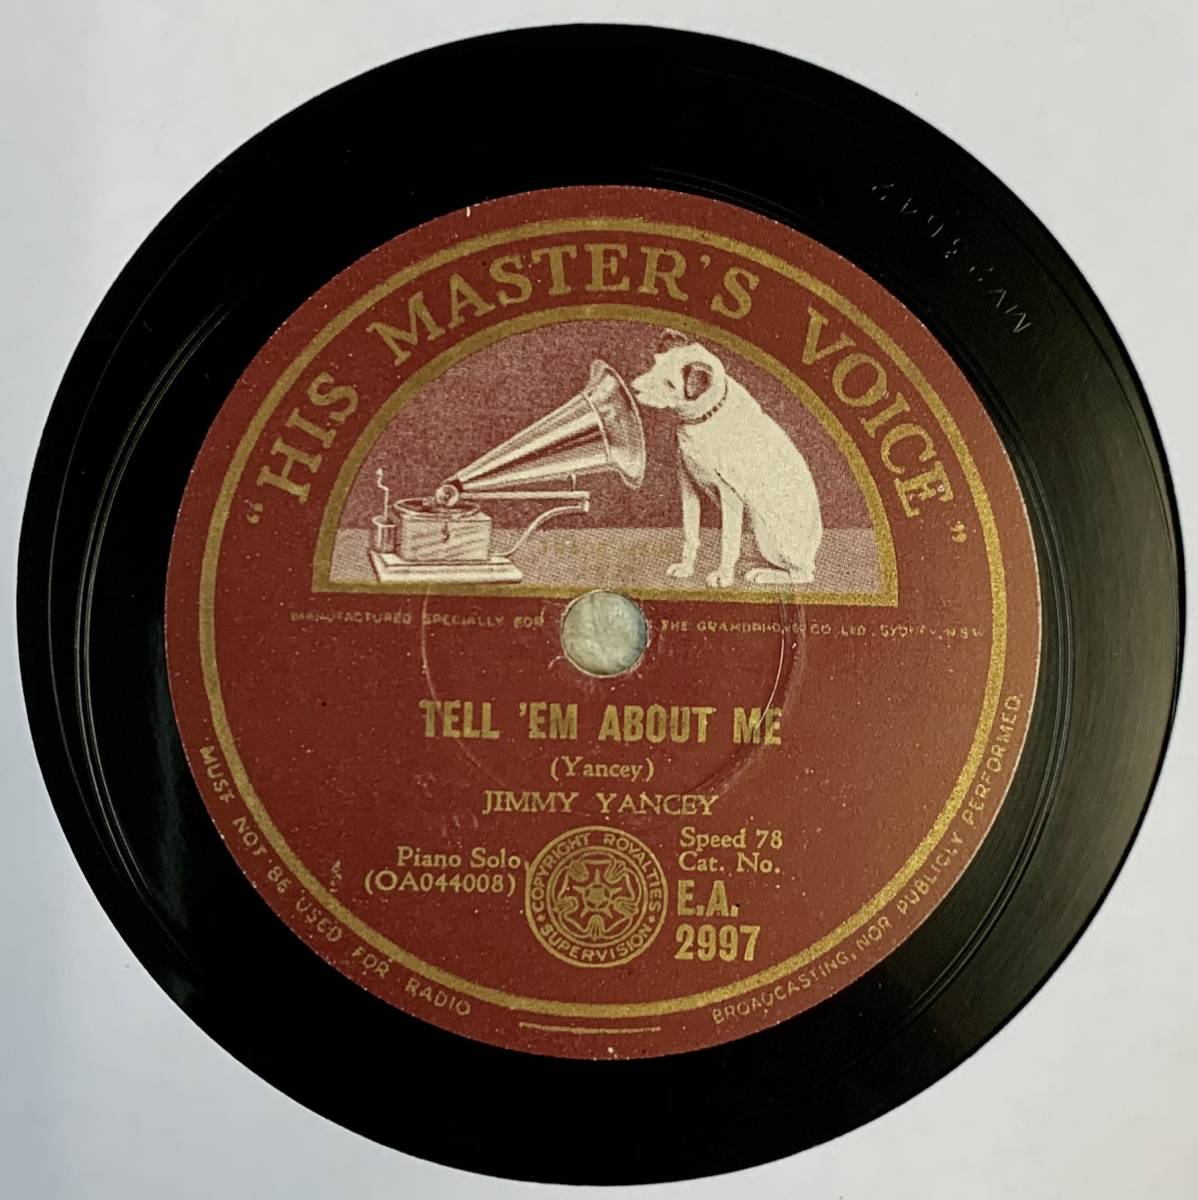 JIMMY YANCEY (Piano Solo) /THE MELLOW BLUES /TELL *EM ABOUT ME (HMV E.A.2997)SP record 78RPM JAZZ {.}